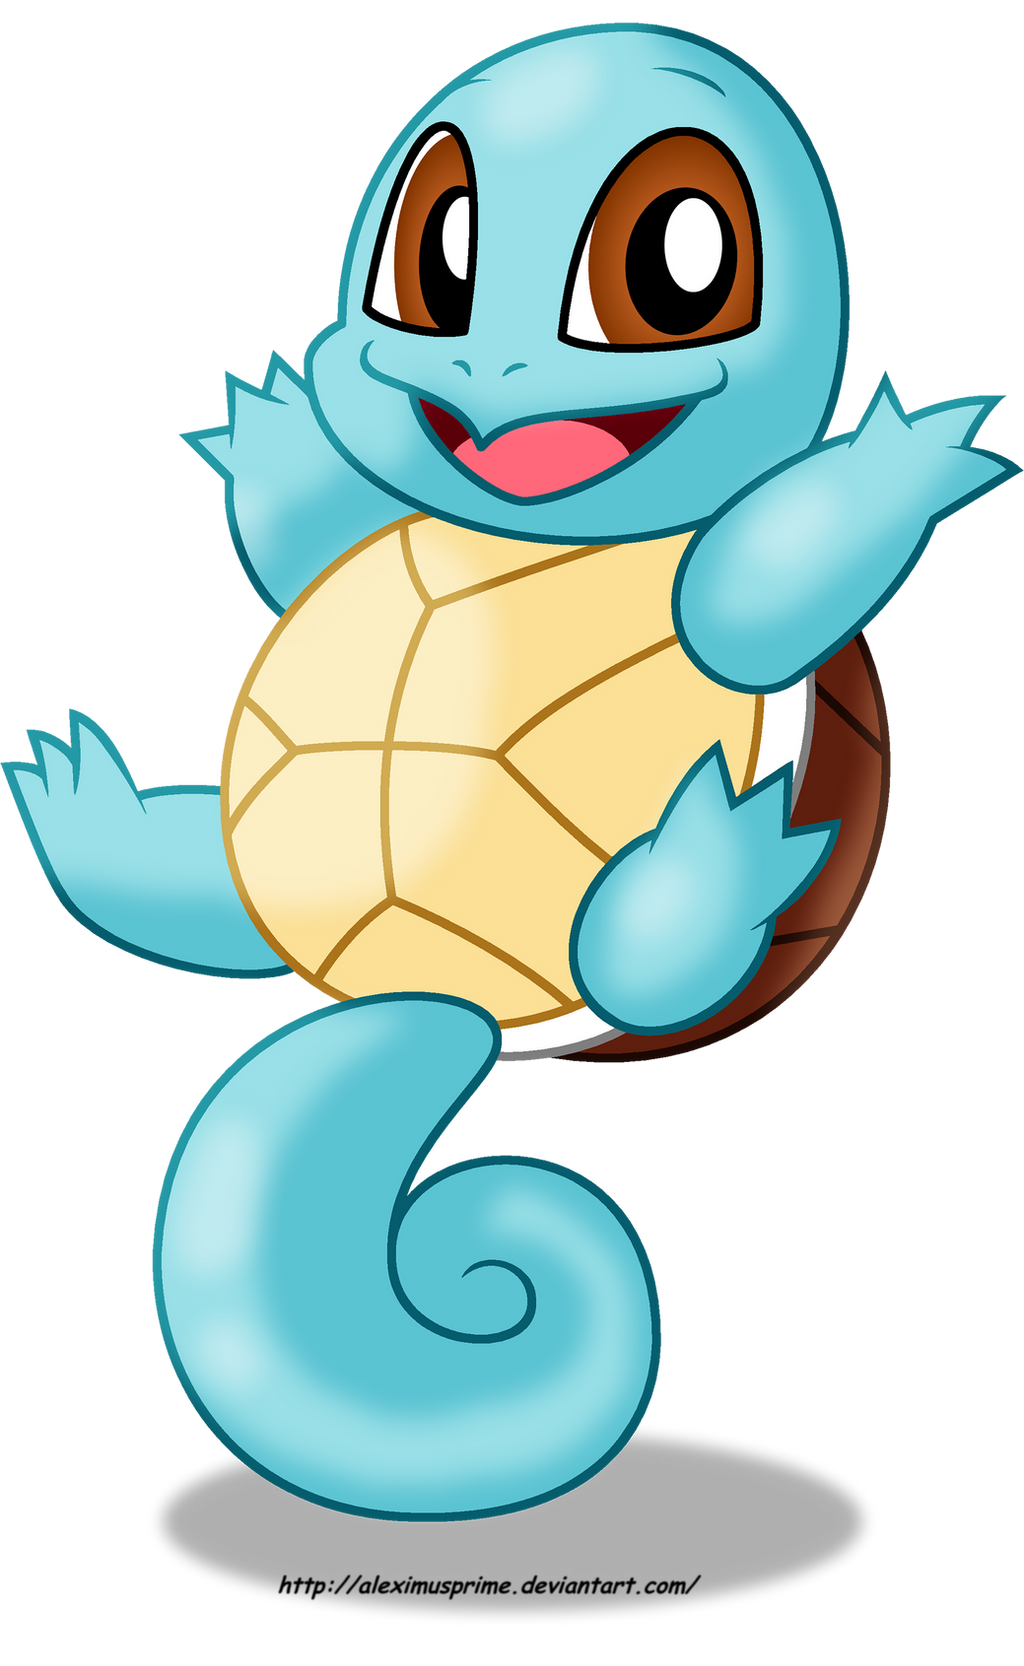 Squirtle by AleximusPrime on DeviantArt.